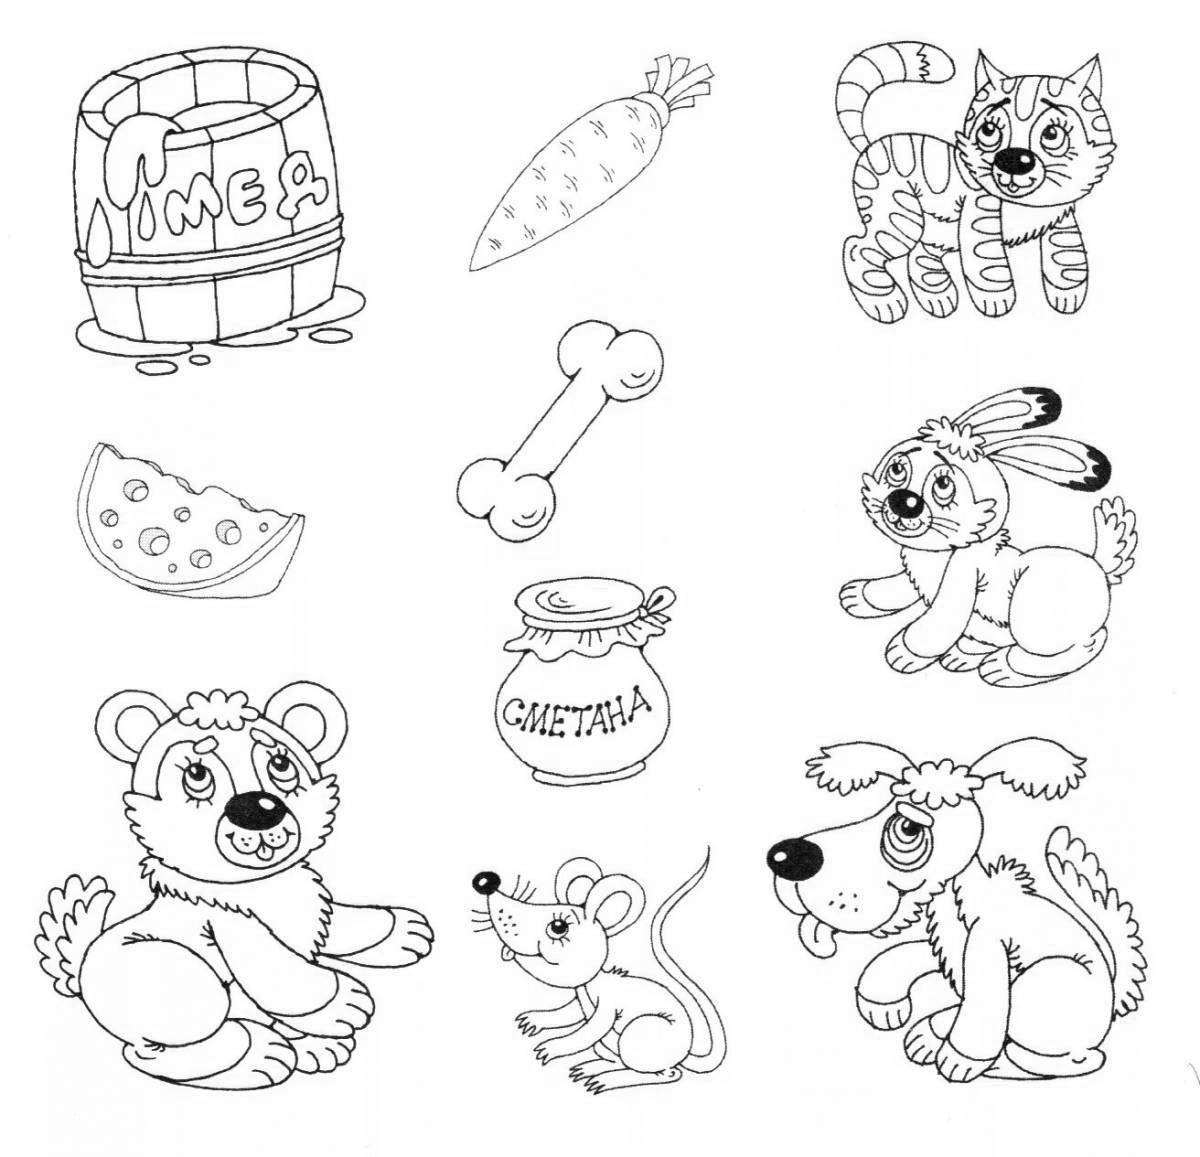 Satisfactory coloring for children, developing